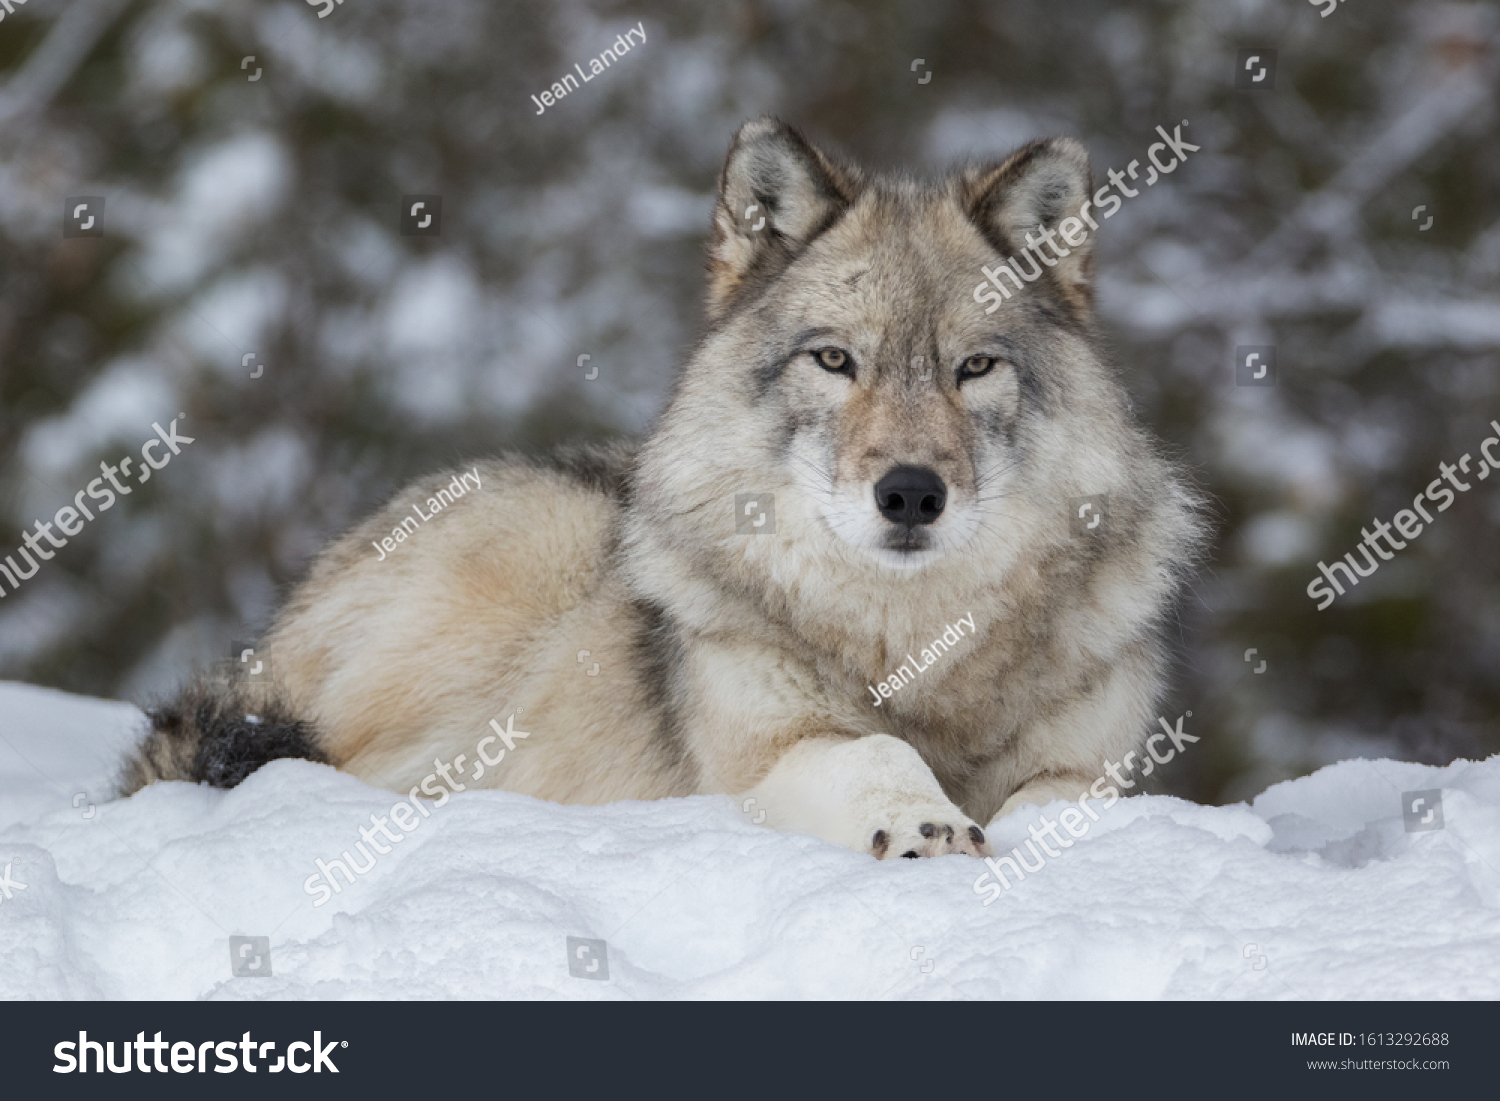 Close Gray Wolf Laying Down Snow Stock Photo 1613292688 | Shutterstock